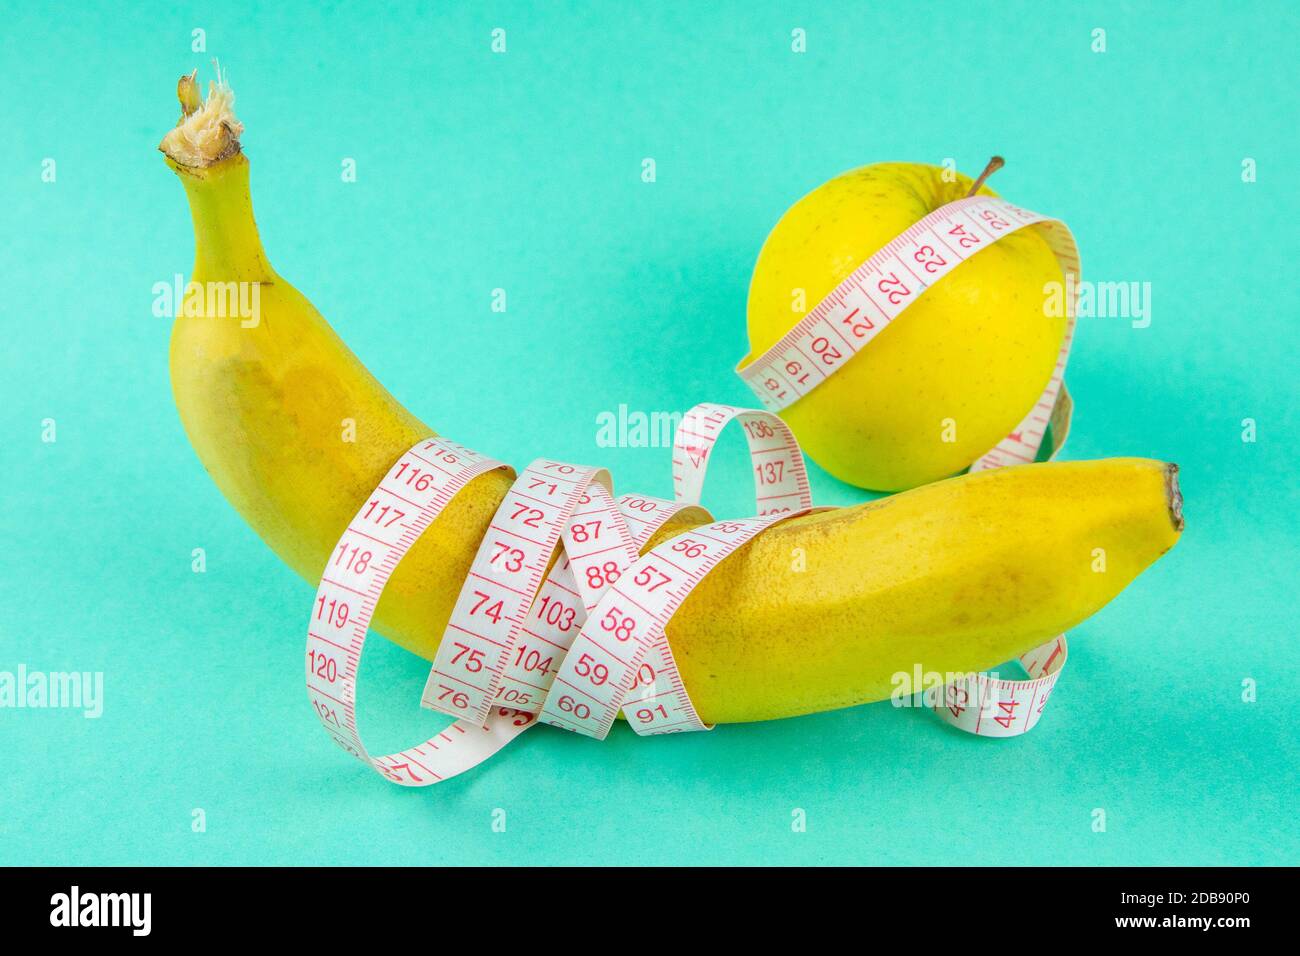 Different types of fruit, such as apples and bananas lie on a single-footed base and are wrapped in a measuring tape - concept for healthy weight loss Stock Photo